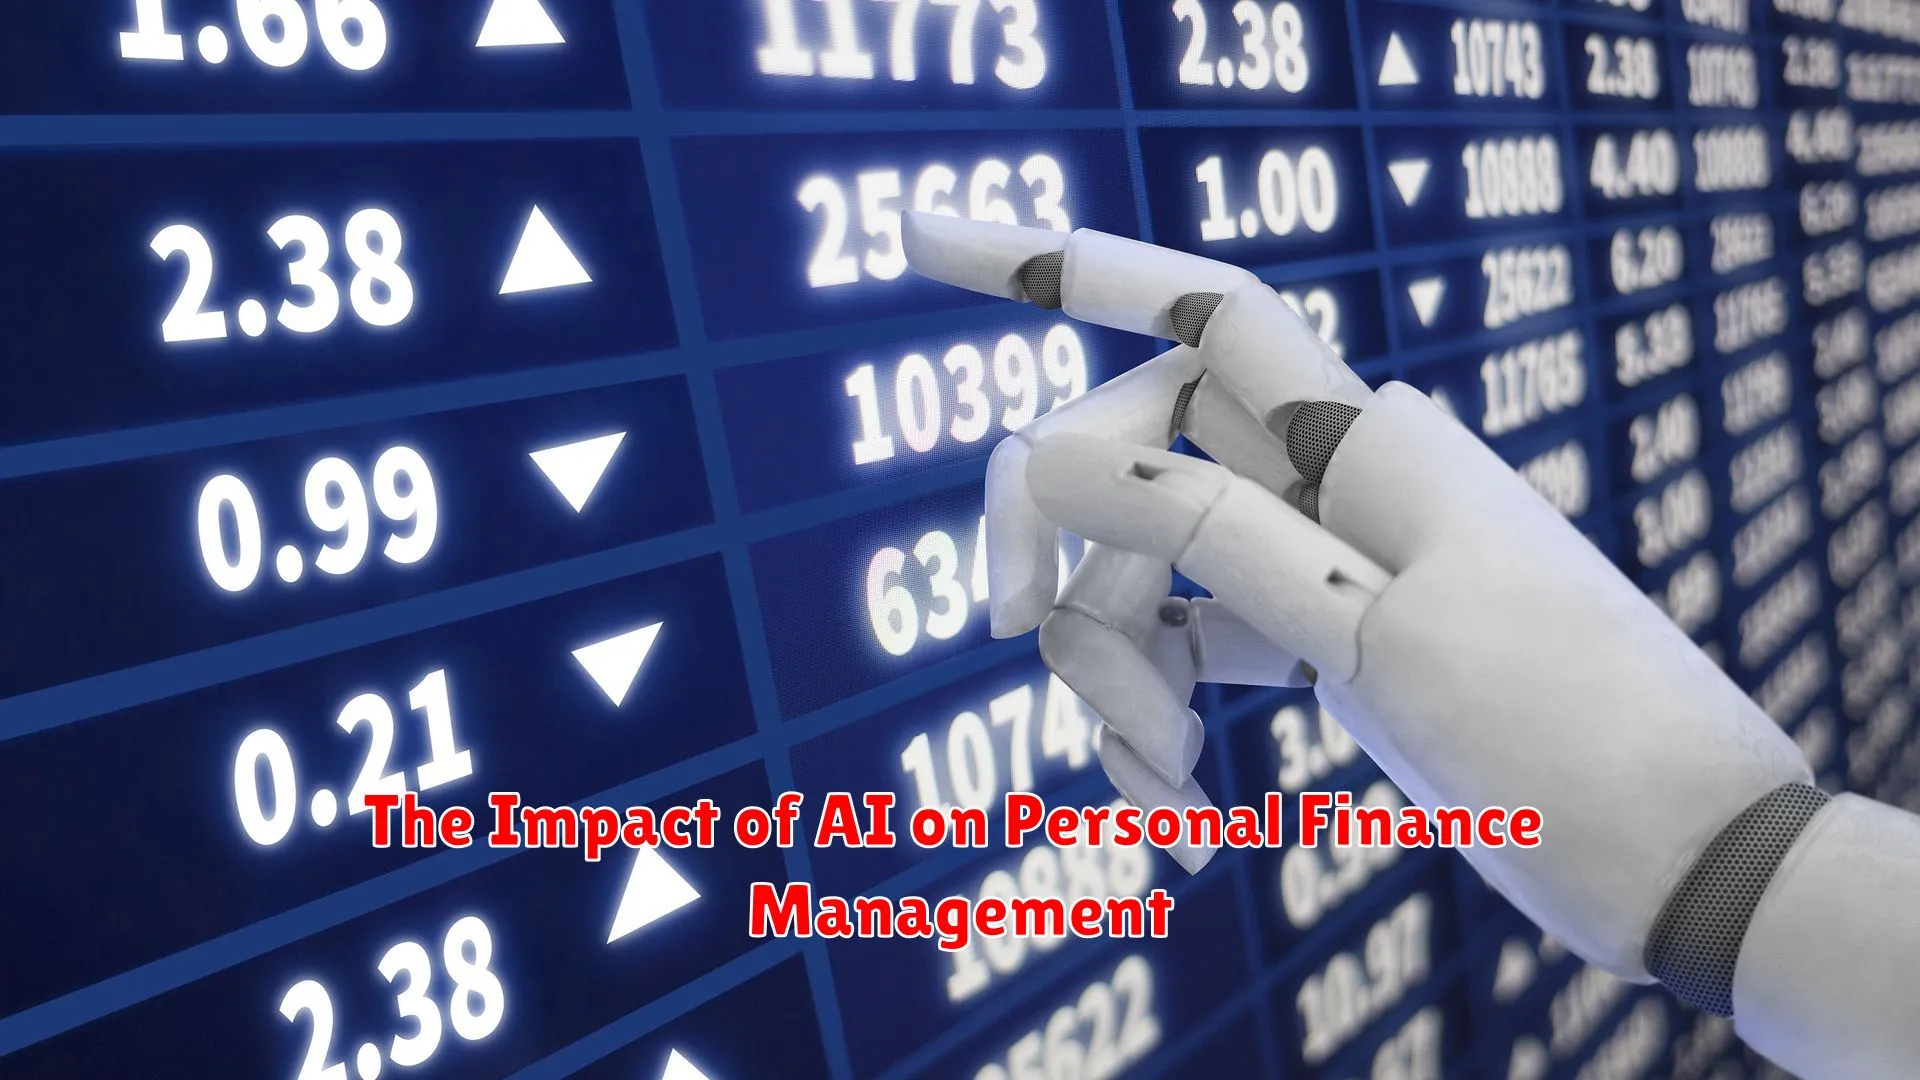 The Impact of AI on Personal Finance Management